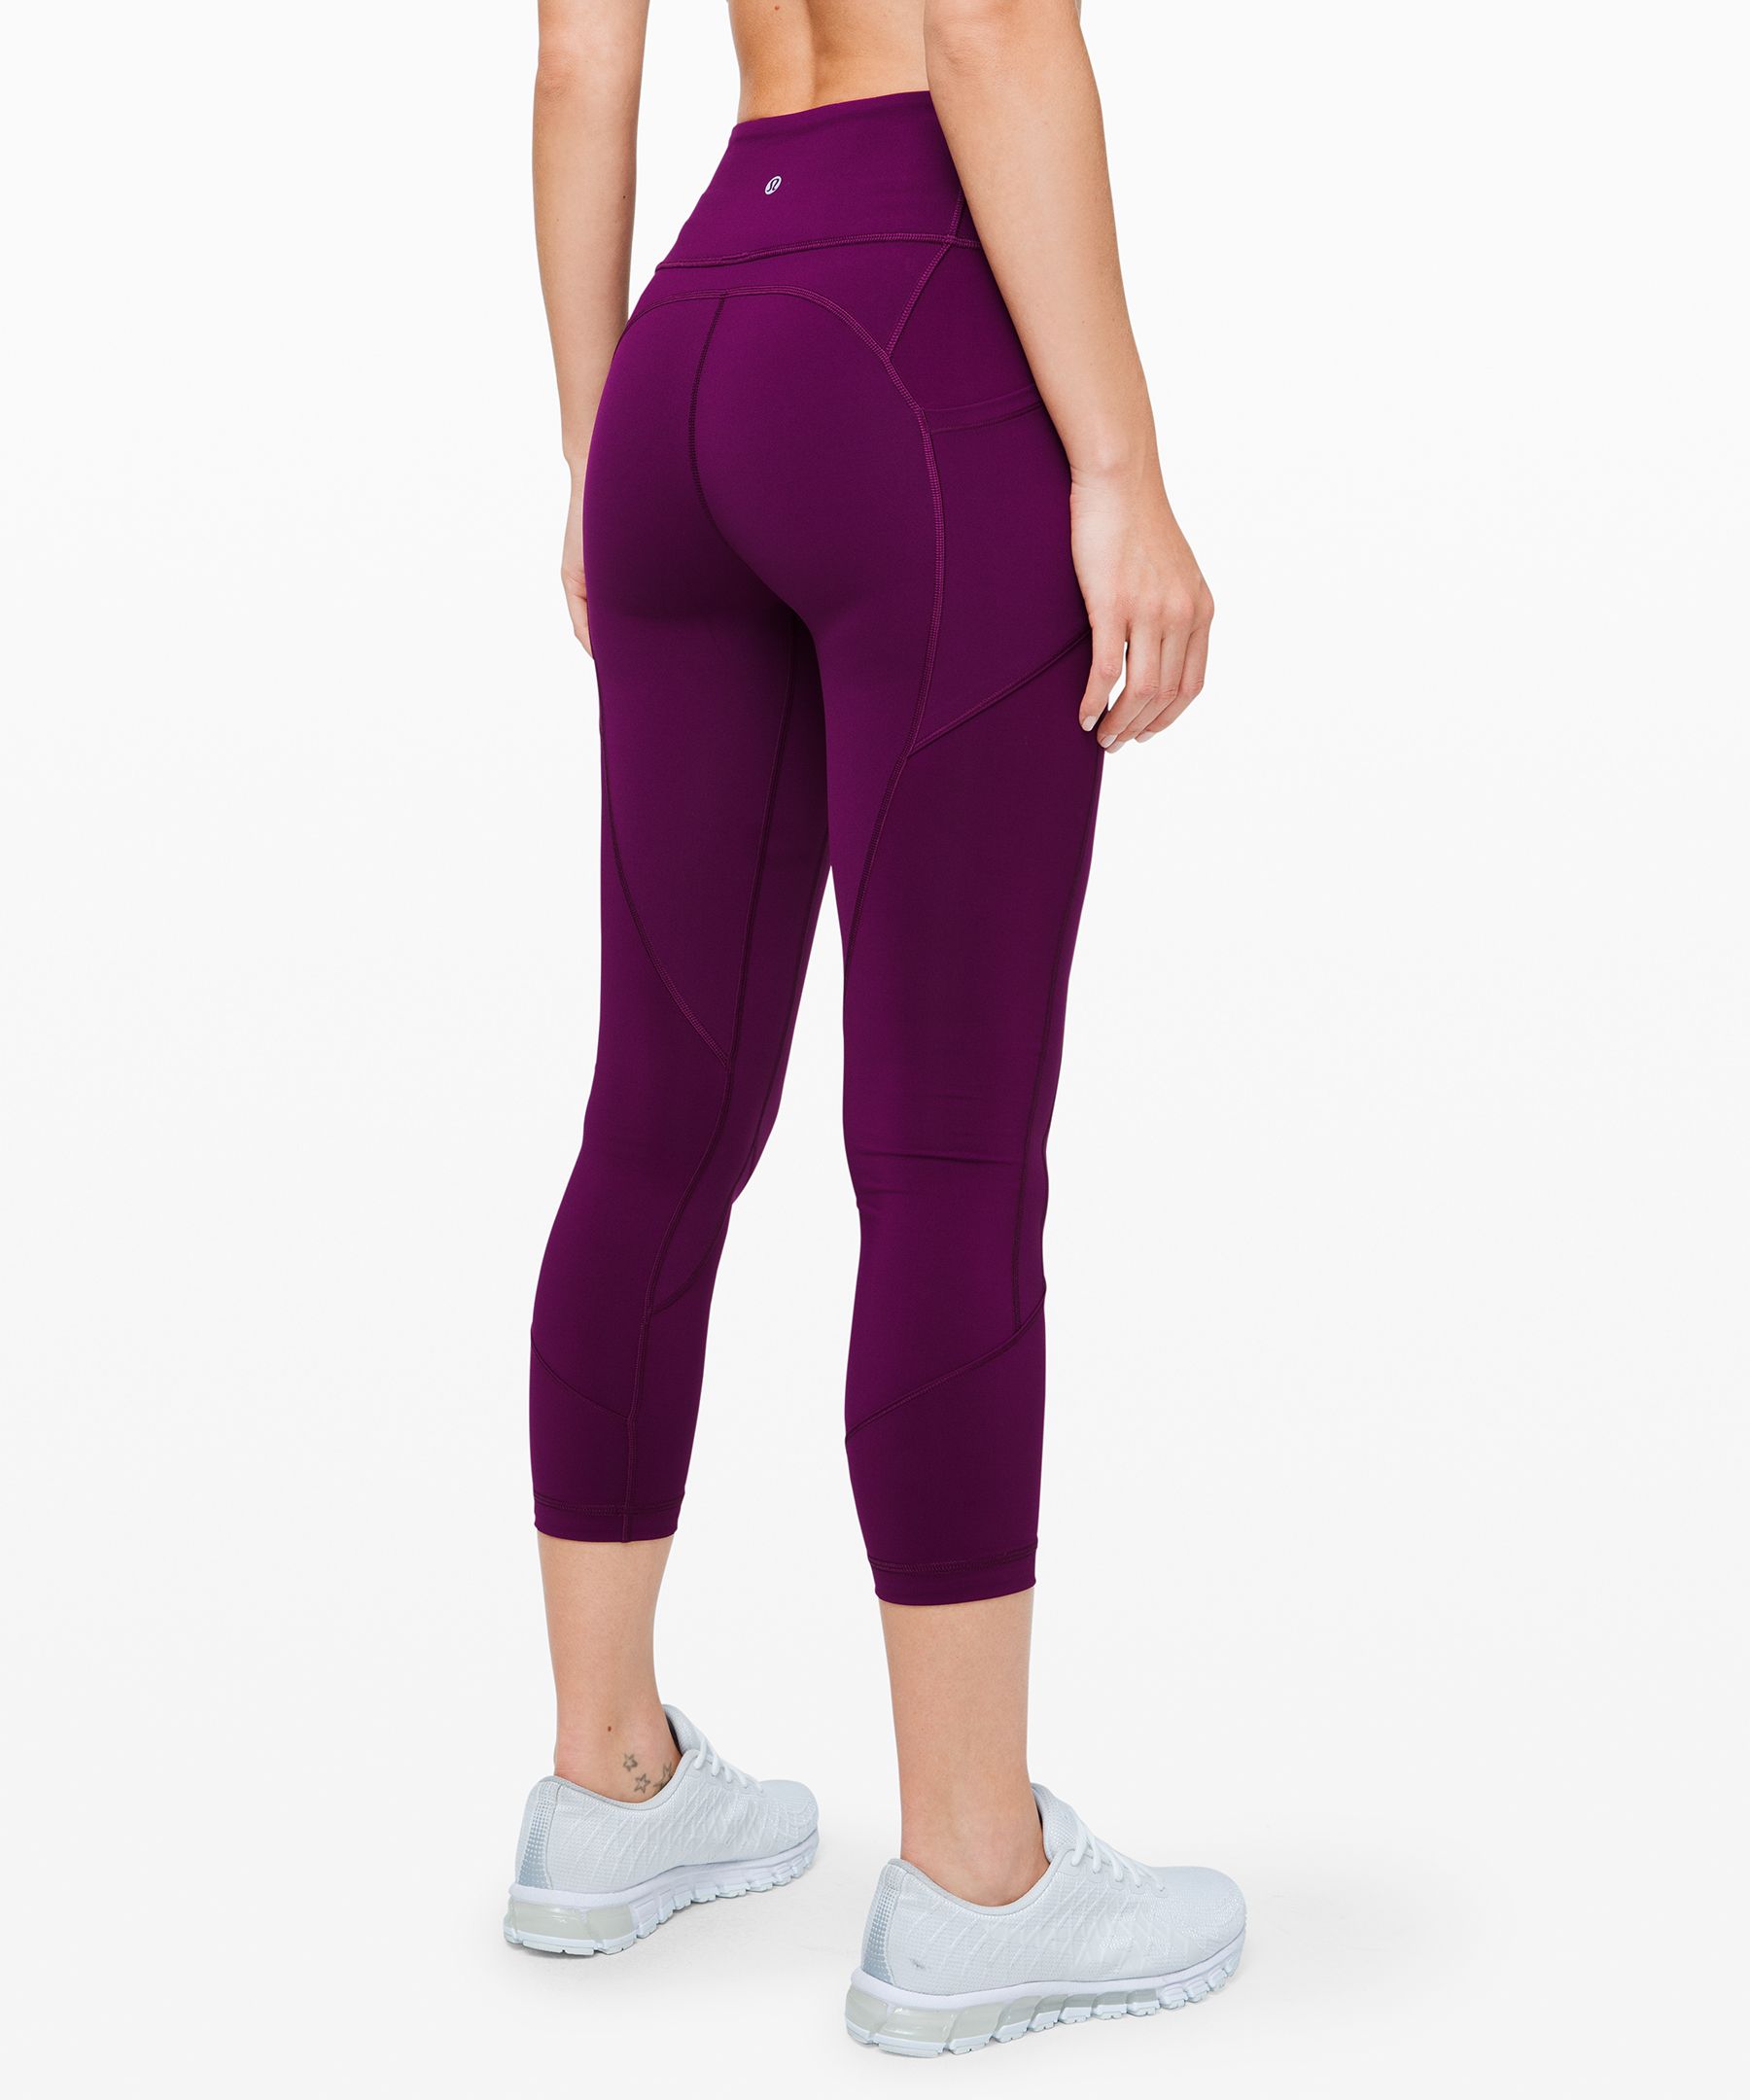 Lululemon All The Right Places Crop II leggings on sale